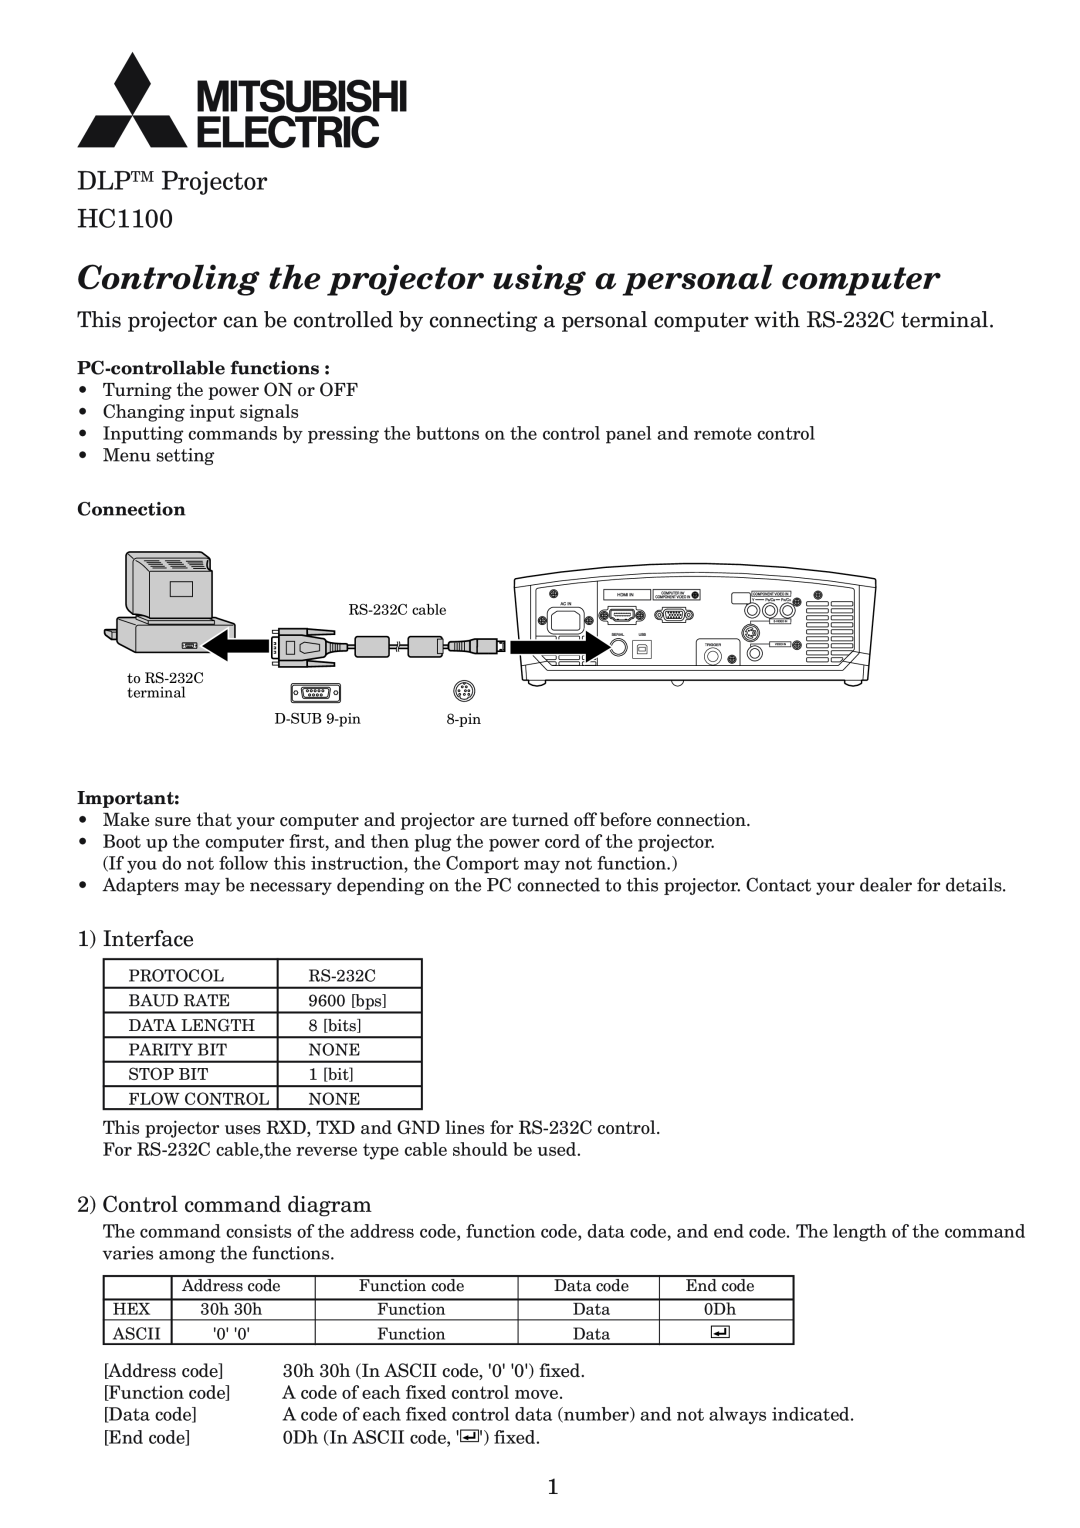 Mitsubishi Electronics HC1100 manual Interface, Control command diagram, PC-controllable functions, Connection 